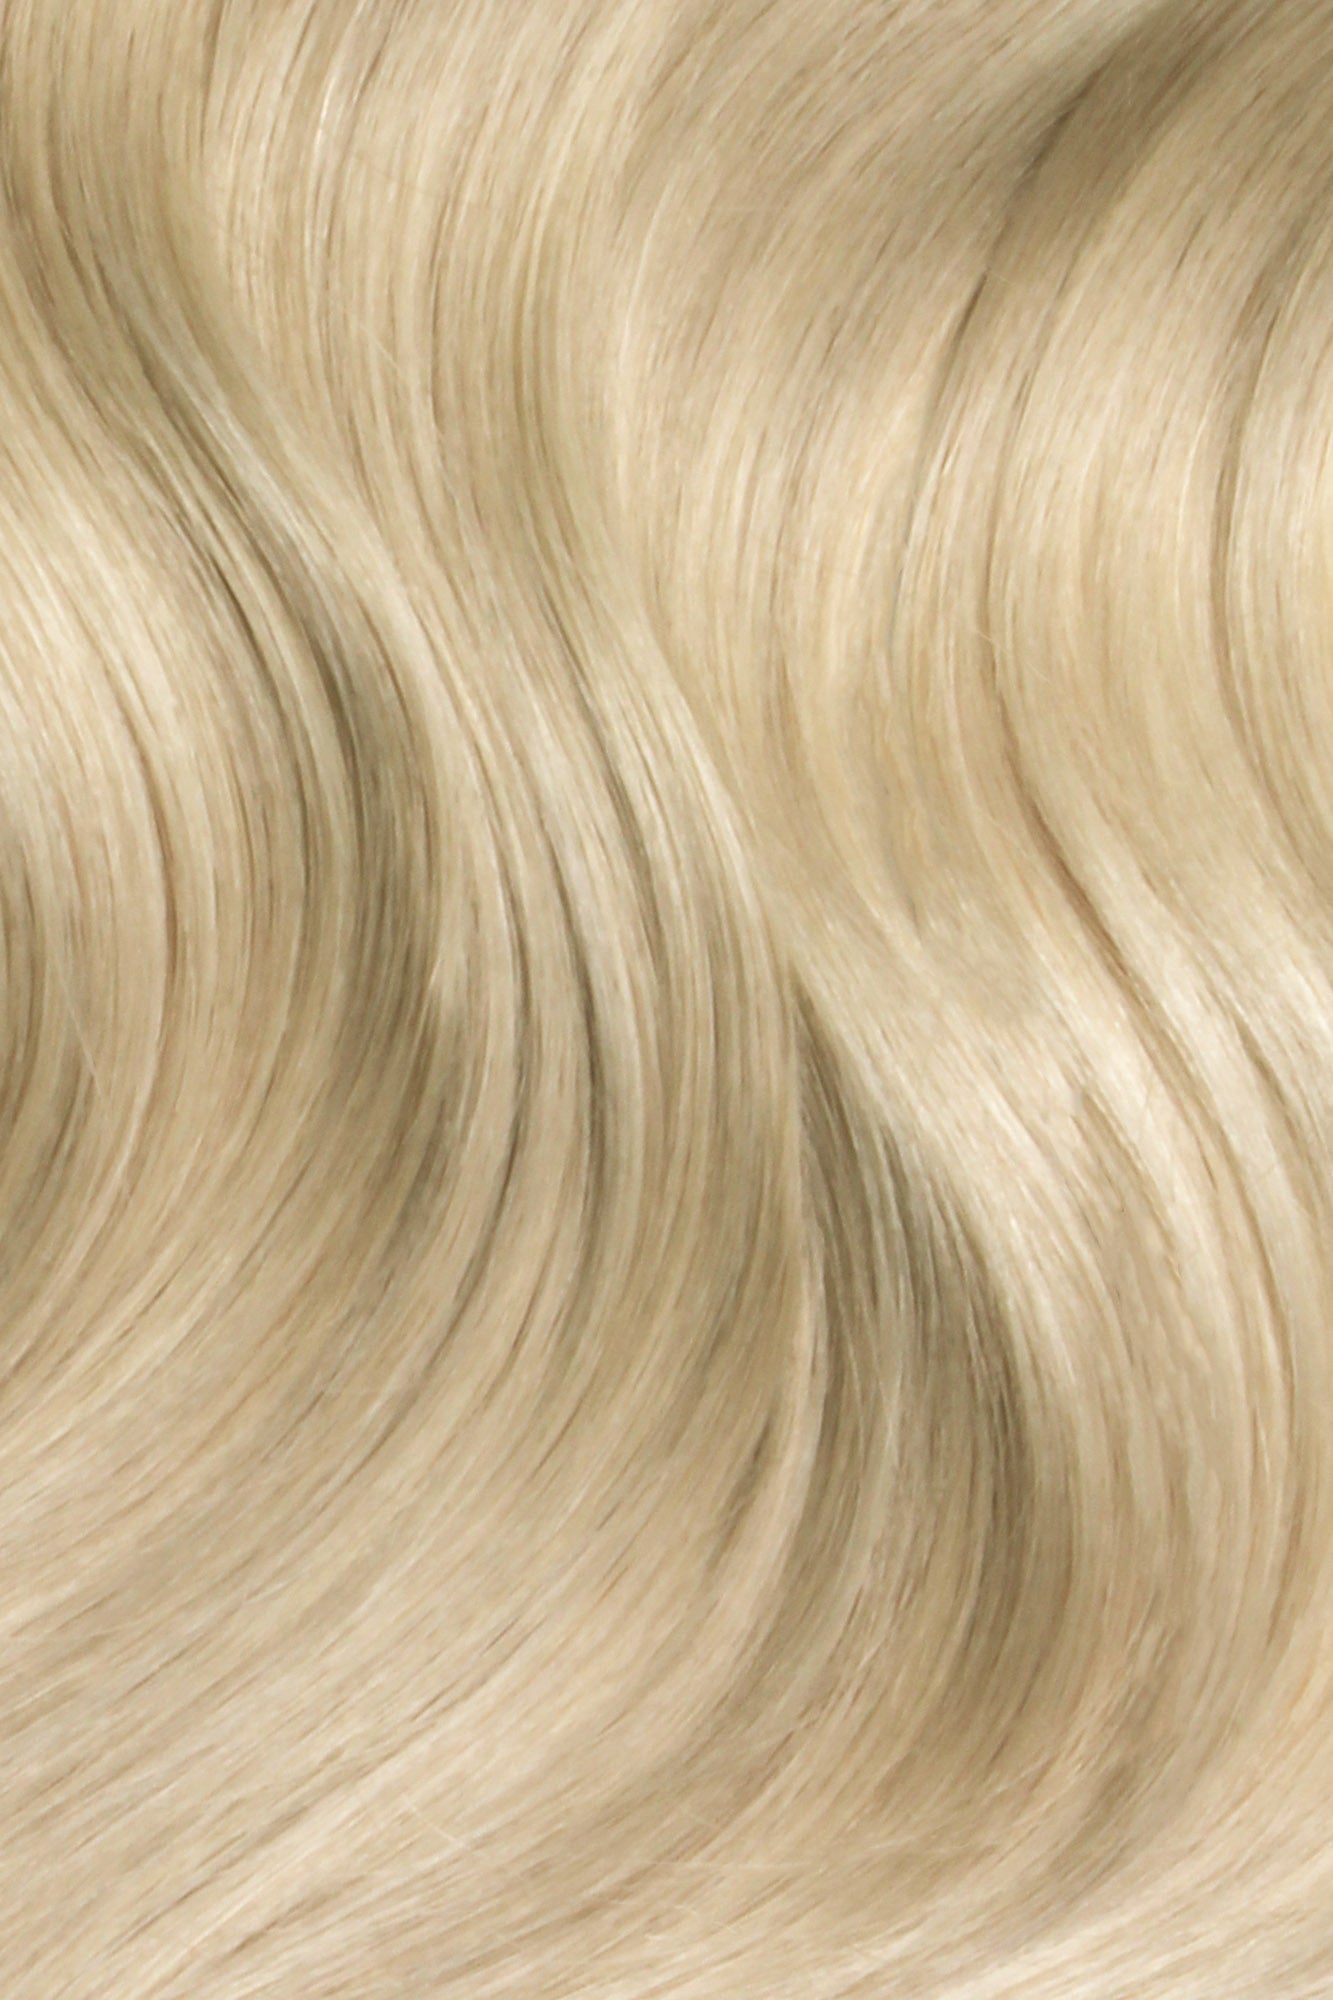 Nano Bonds 22 Inches - SWAY Hair Extensions Hollywood-Ash-Blonde-18A-613A Ultra-fine, invisible bonds for a flawless, natural look. 100% Remy Human hair, lightweight and versatile. Reusable and perfect for individual or salon use.